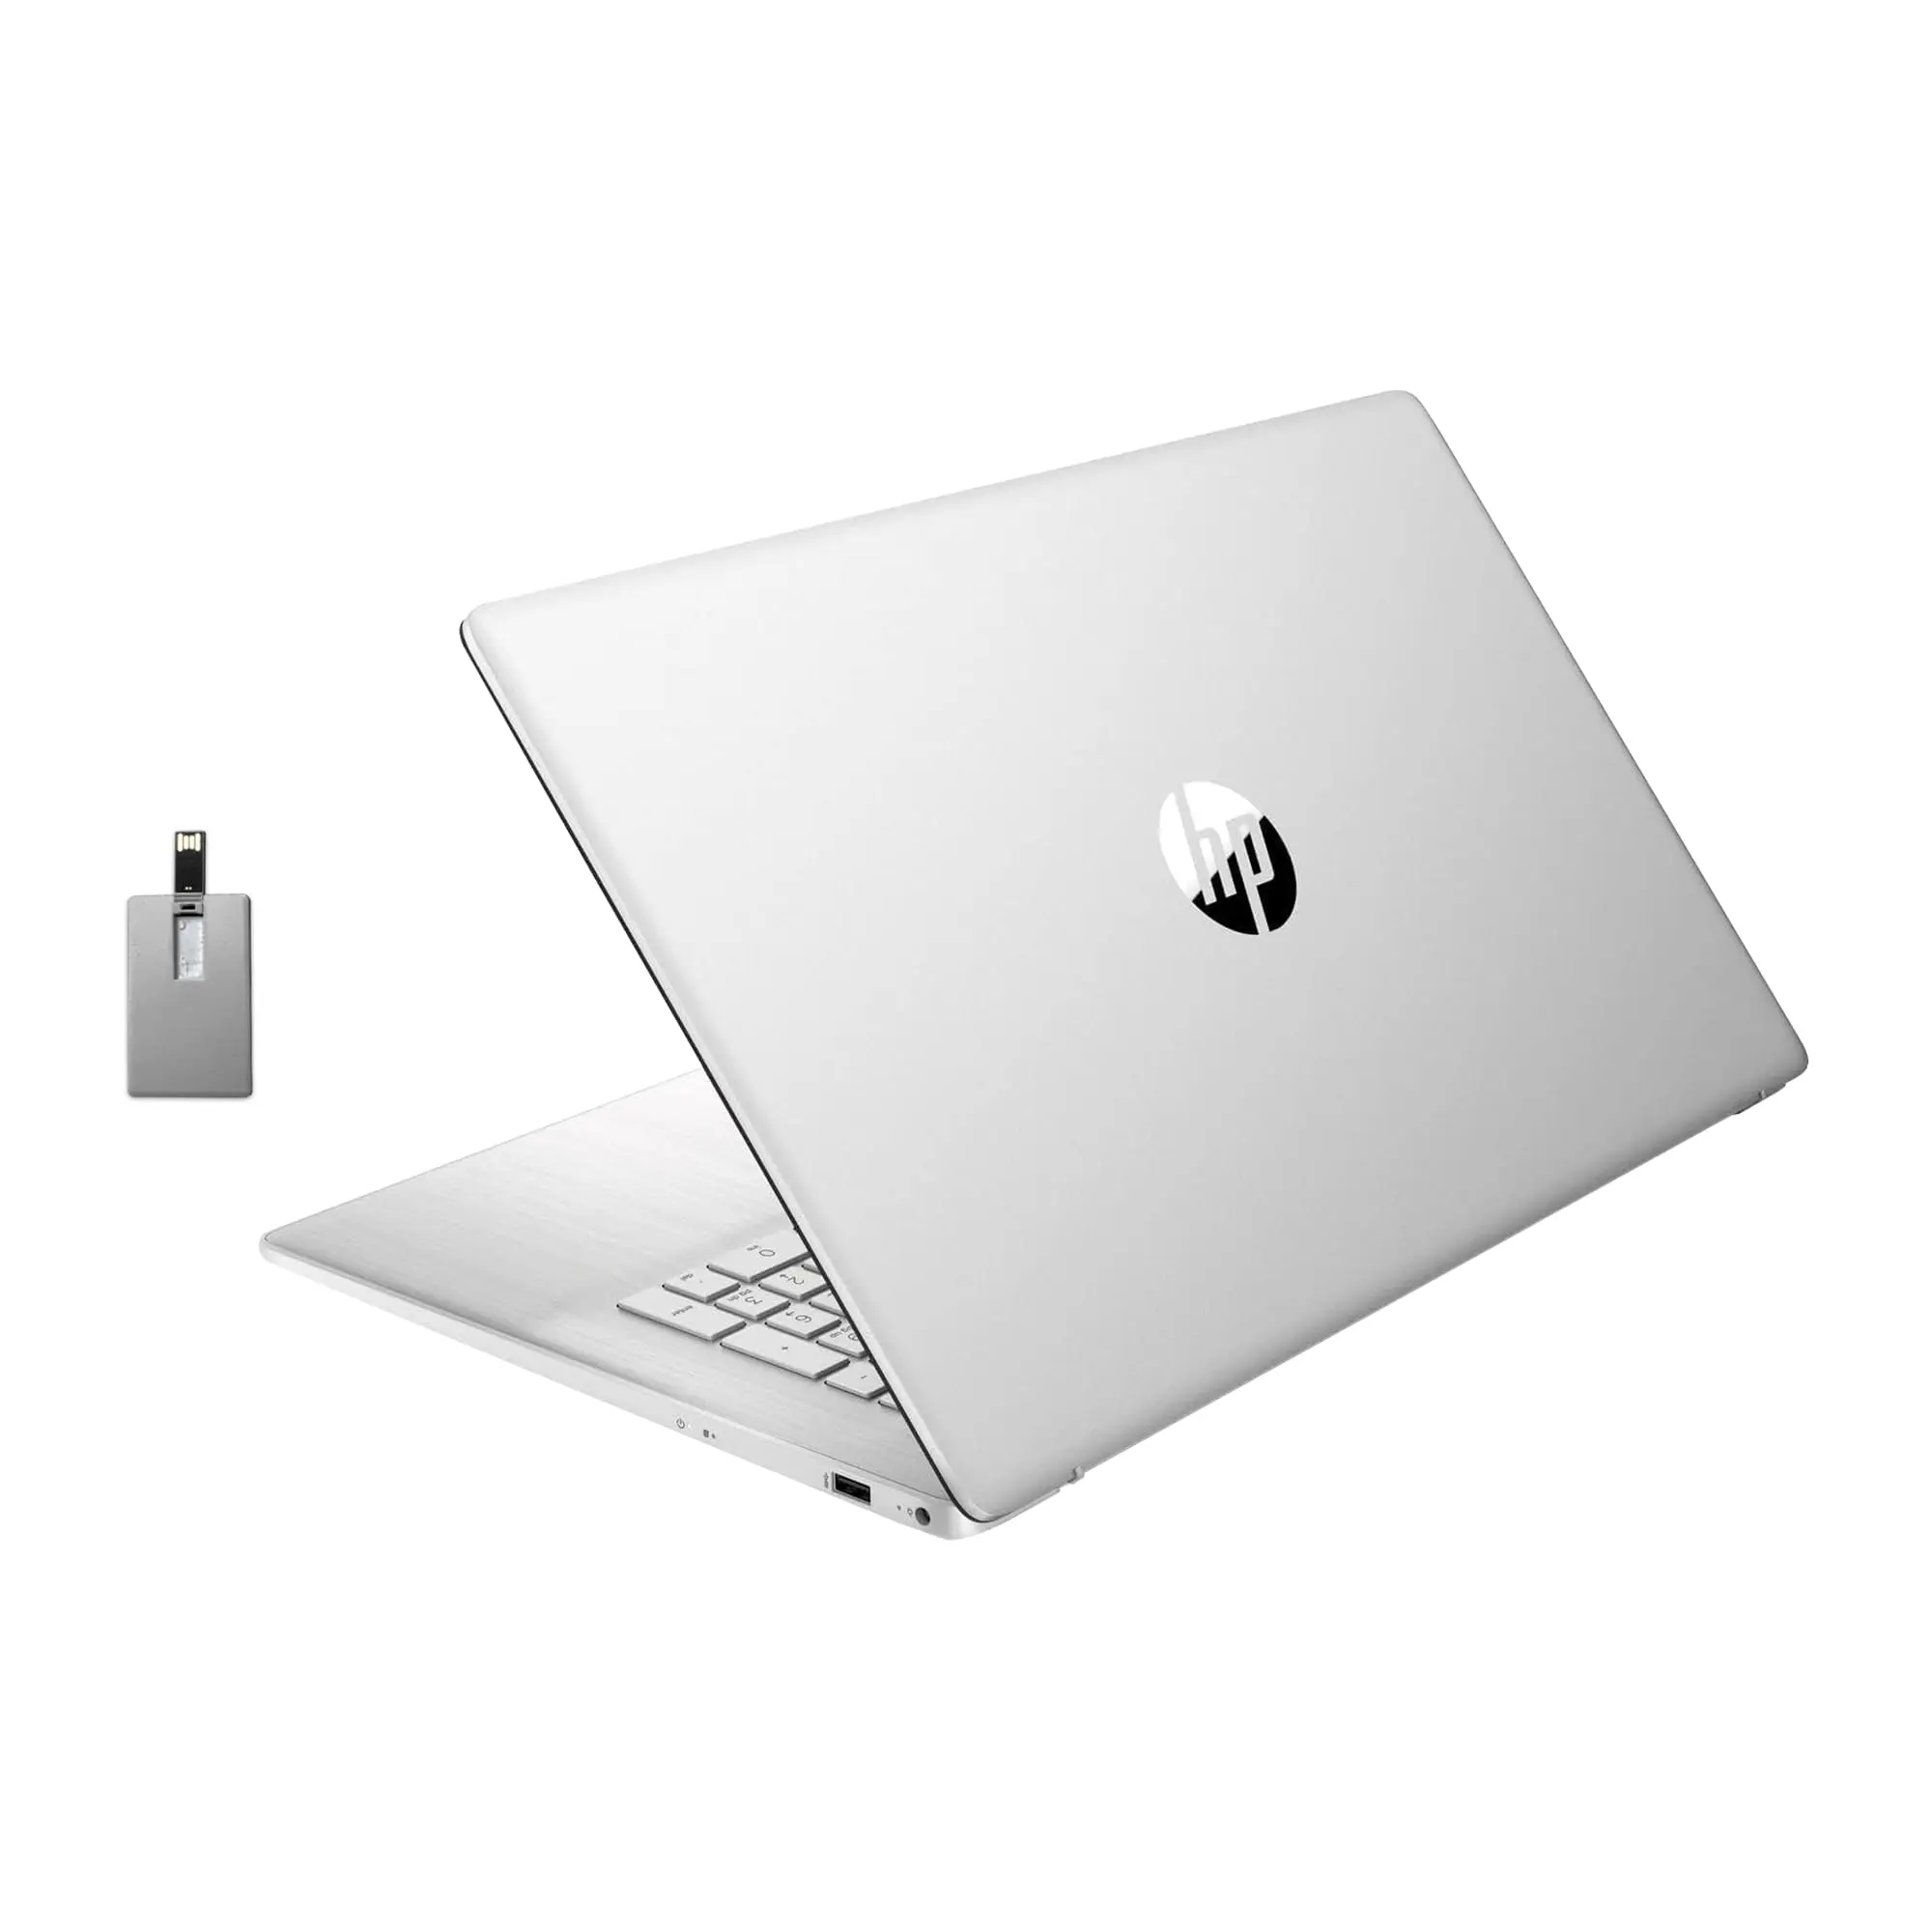 hp core i5 hewlett packard price - What is the price of i5 10 Gen HP